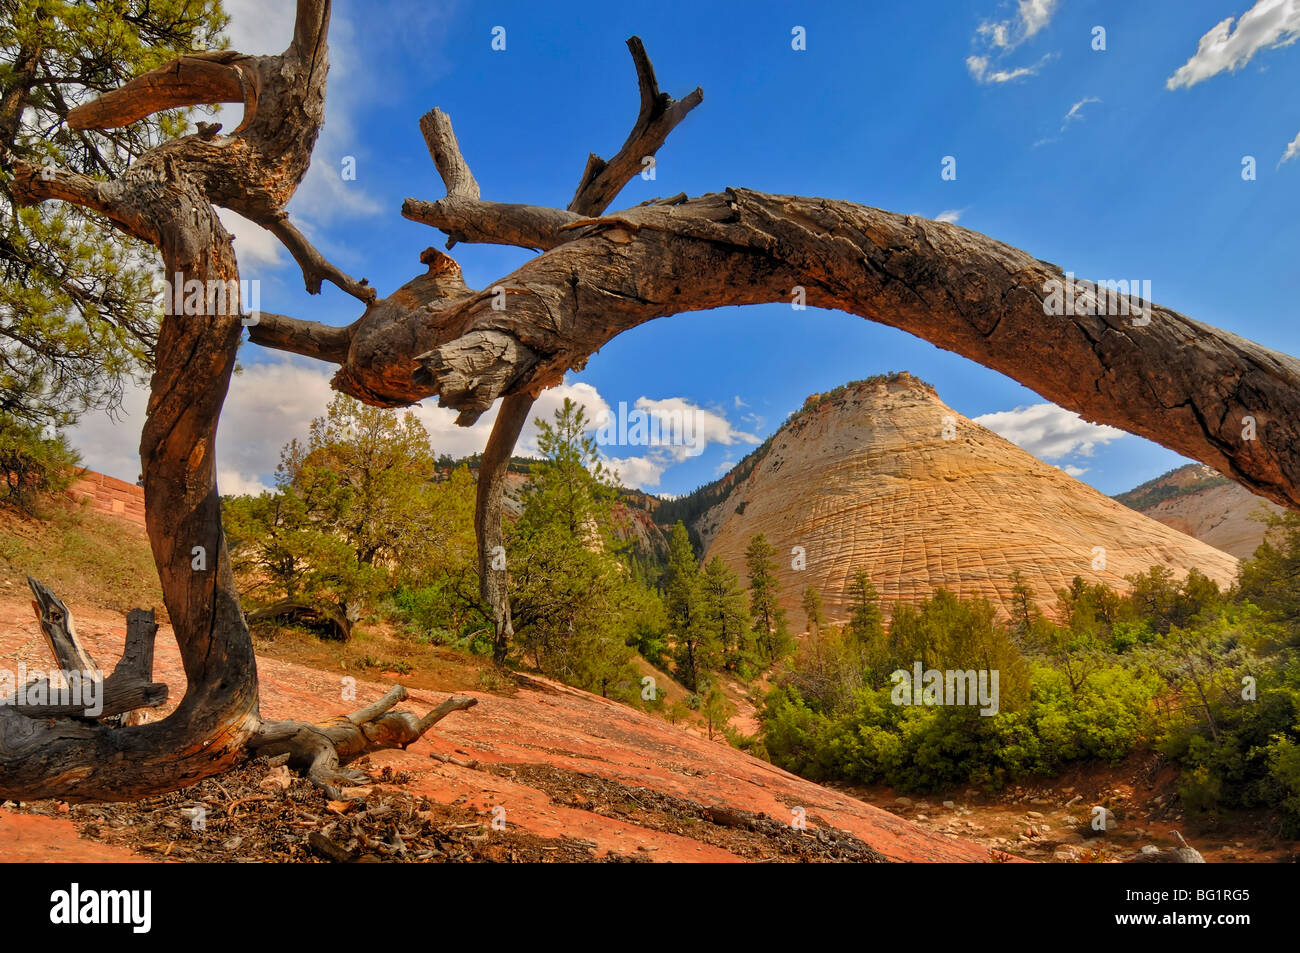 Checkerboard Mesa in Zion National Park, with a fallen tree in the foreground. Utah, USA Stock Photo